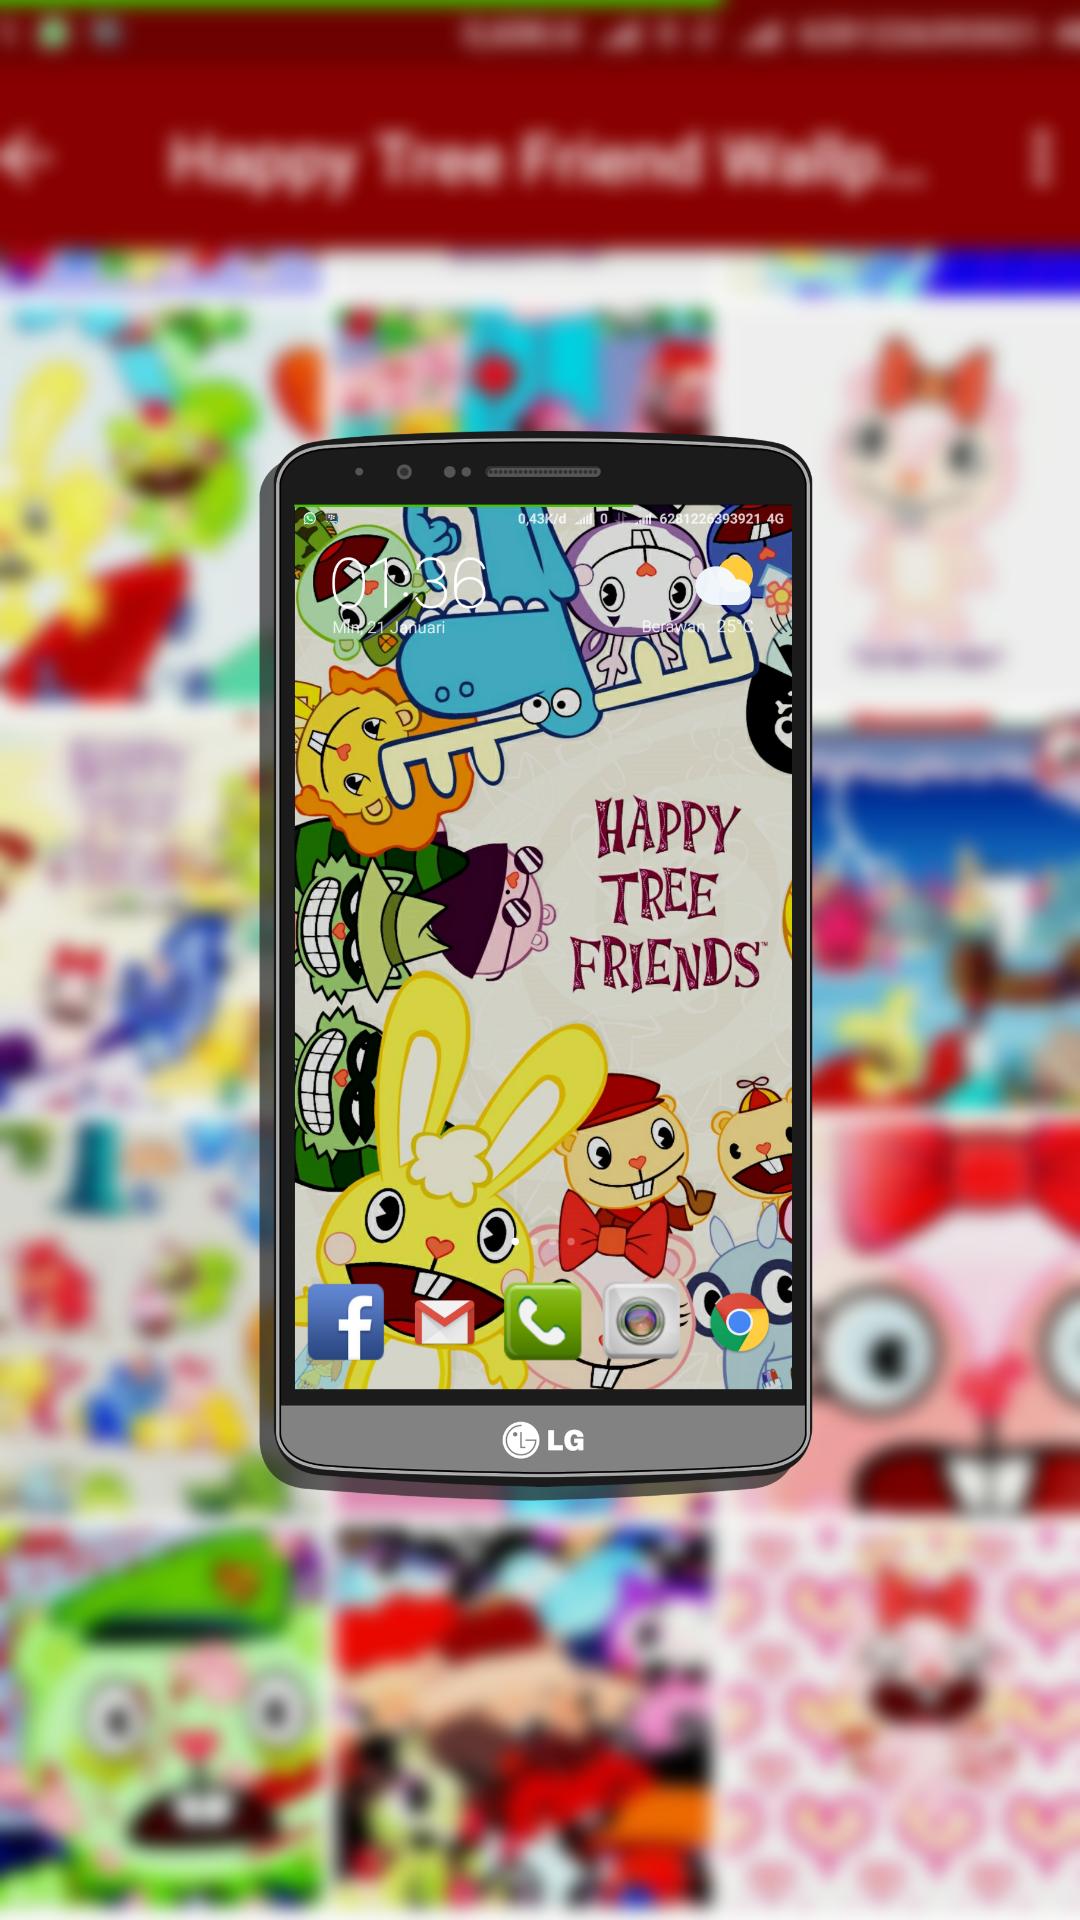 Happy Tree Friend Wallpapers For Android Apk Download